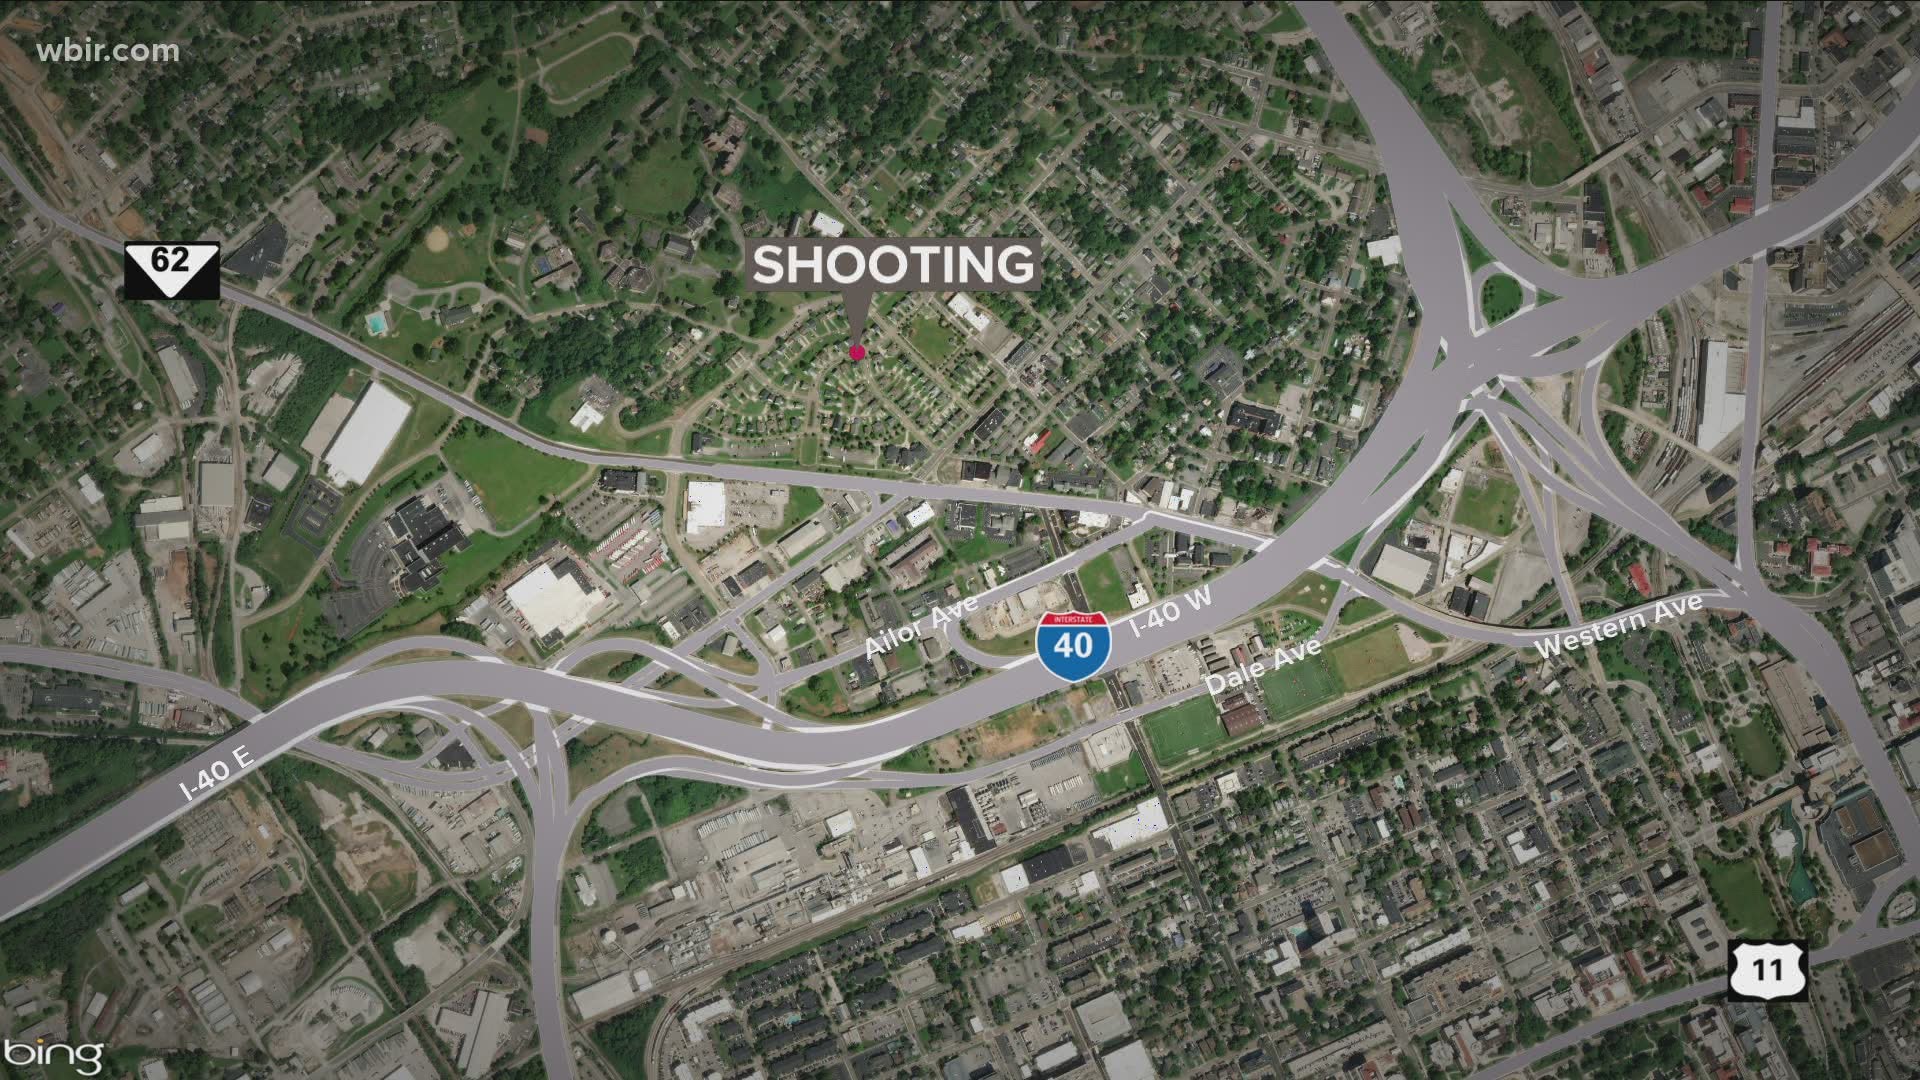 A boy was shot in the hip on Wednesday, KPD said.